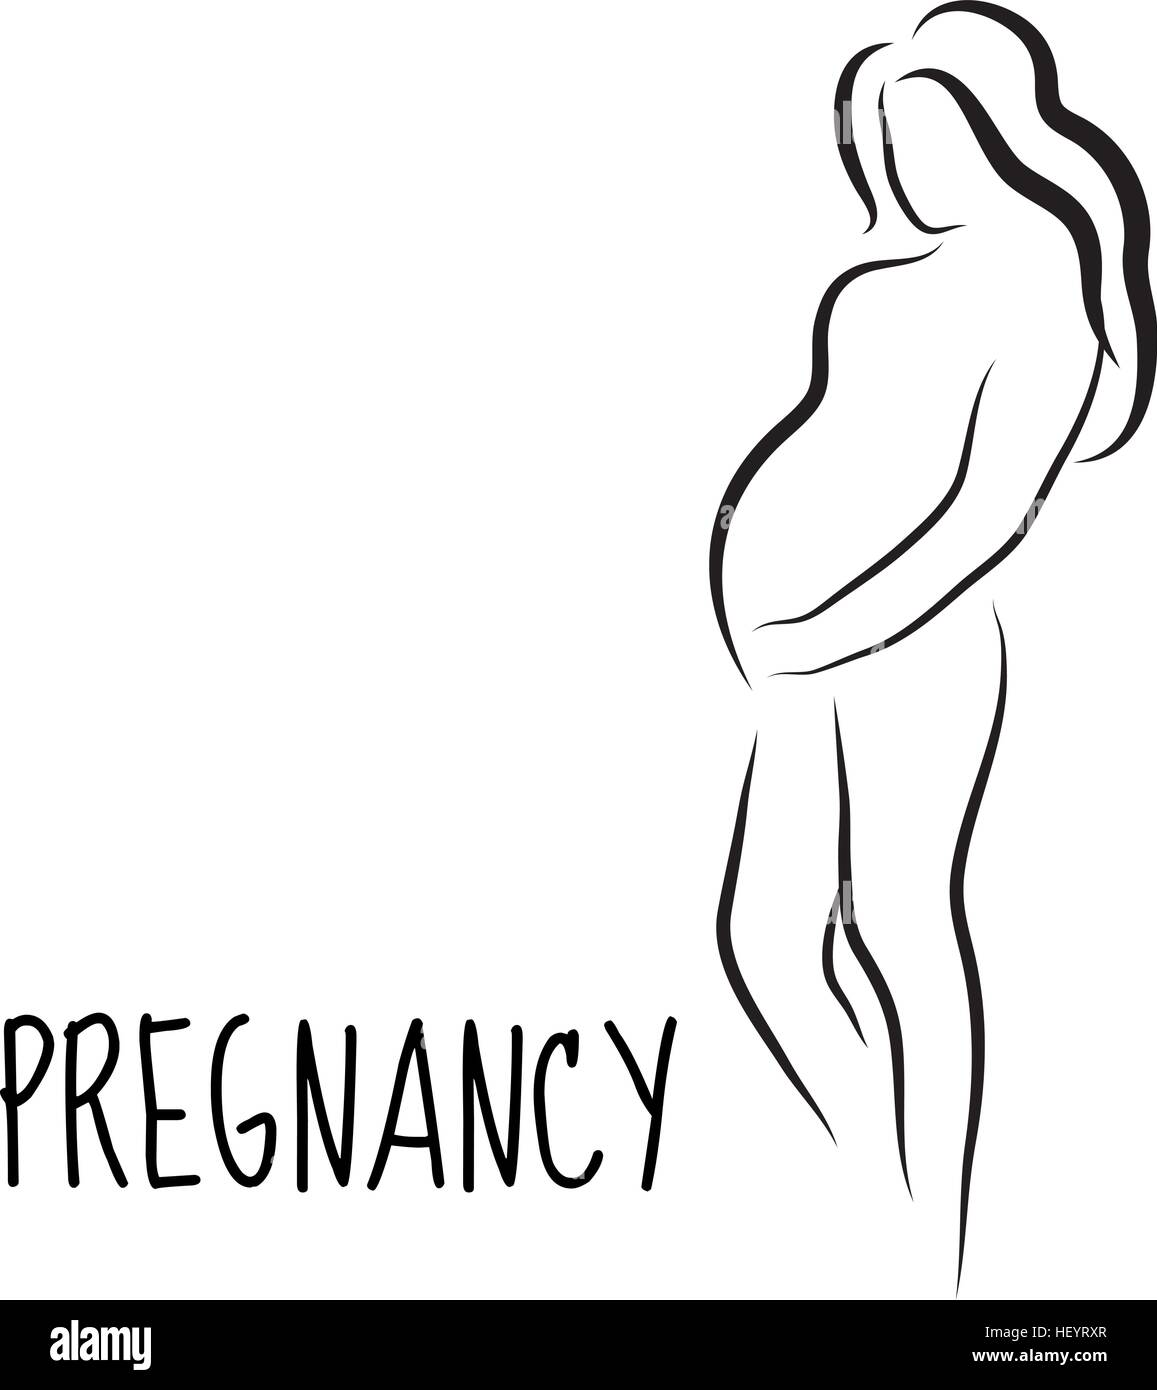 pregnant woman silhouette, isolated vector symbol Stock Vector